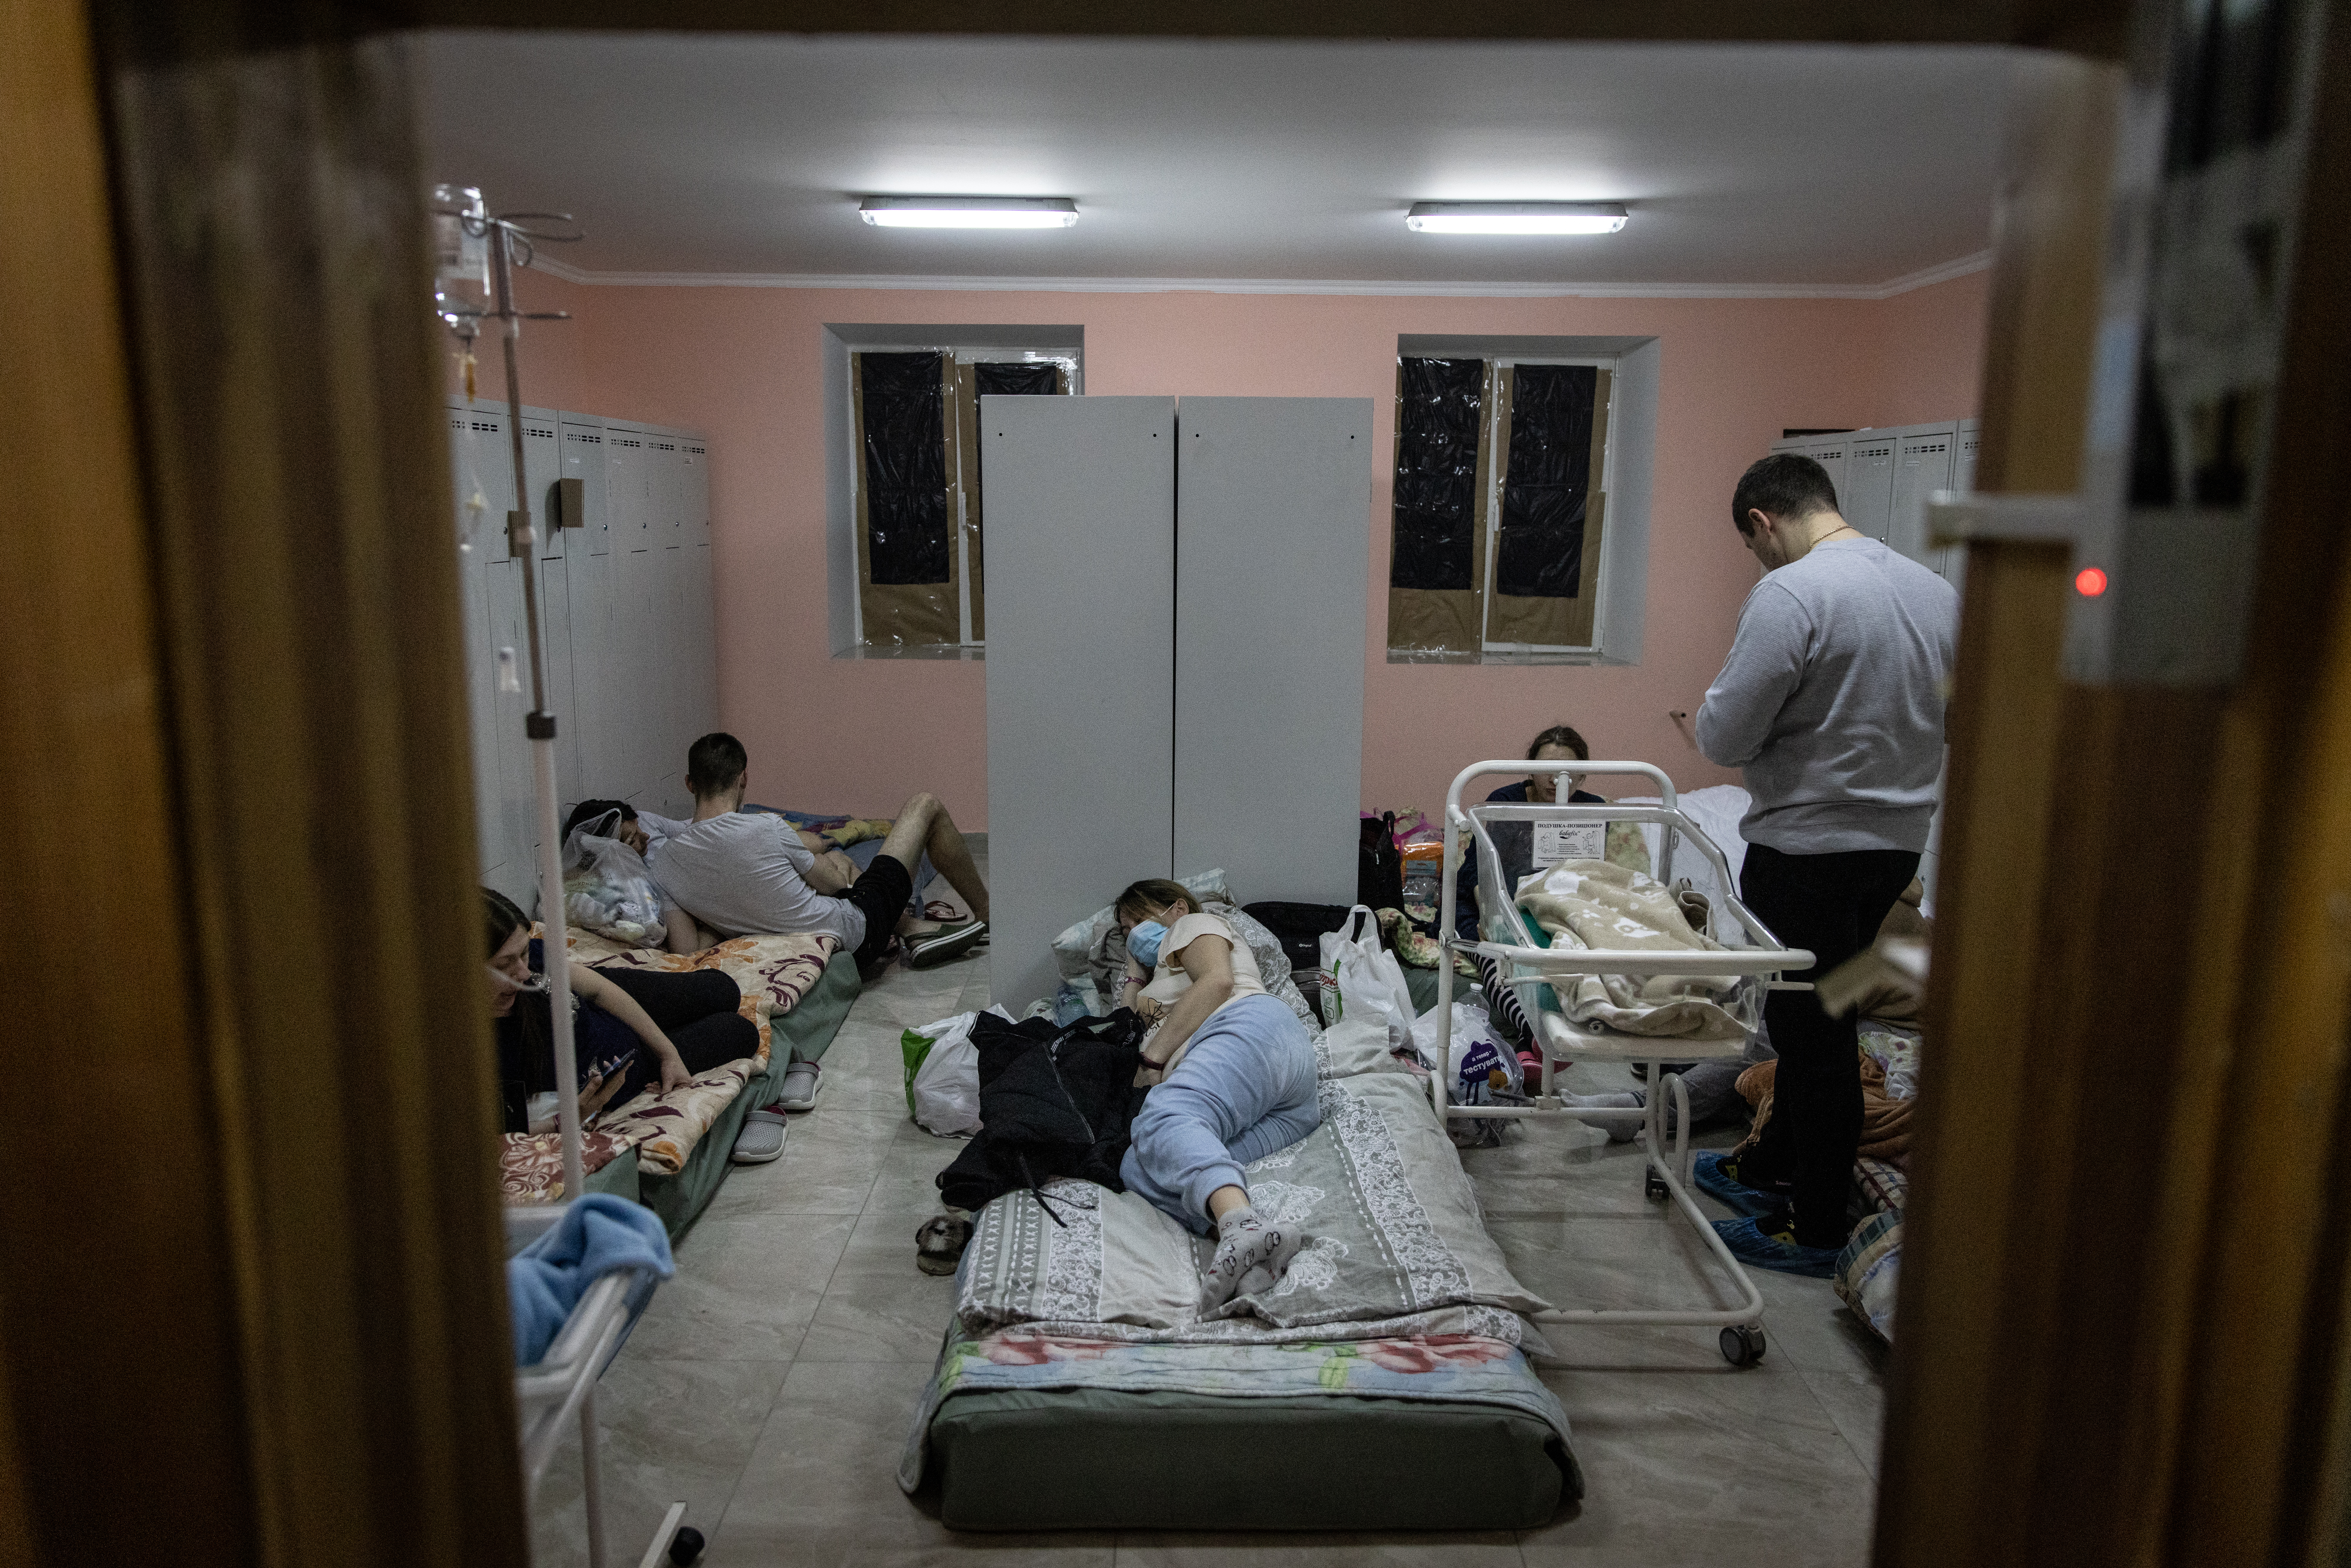 Women rest in the bomb shelter of a maternity hospital on March 02, 2022 in Kyiv, Ukraine. Russian forces continued their advance on the Ukrainian capital for the seventh day as the country's invasion of its western neighbour goes on. Intense battles are also being waged over Ukraine's other major cities. (Photo by Chris McGrath/Getty Images)